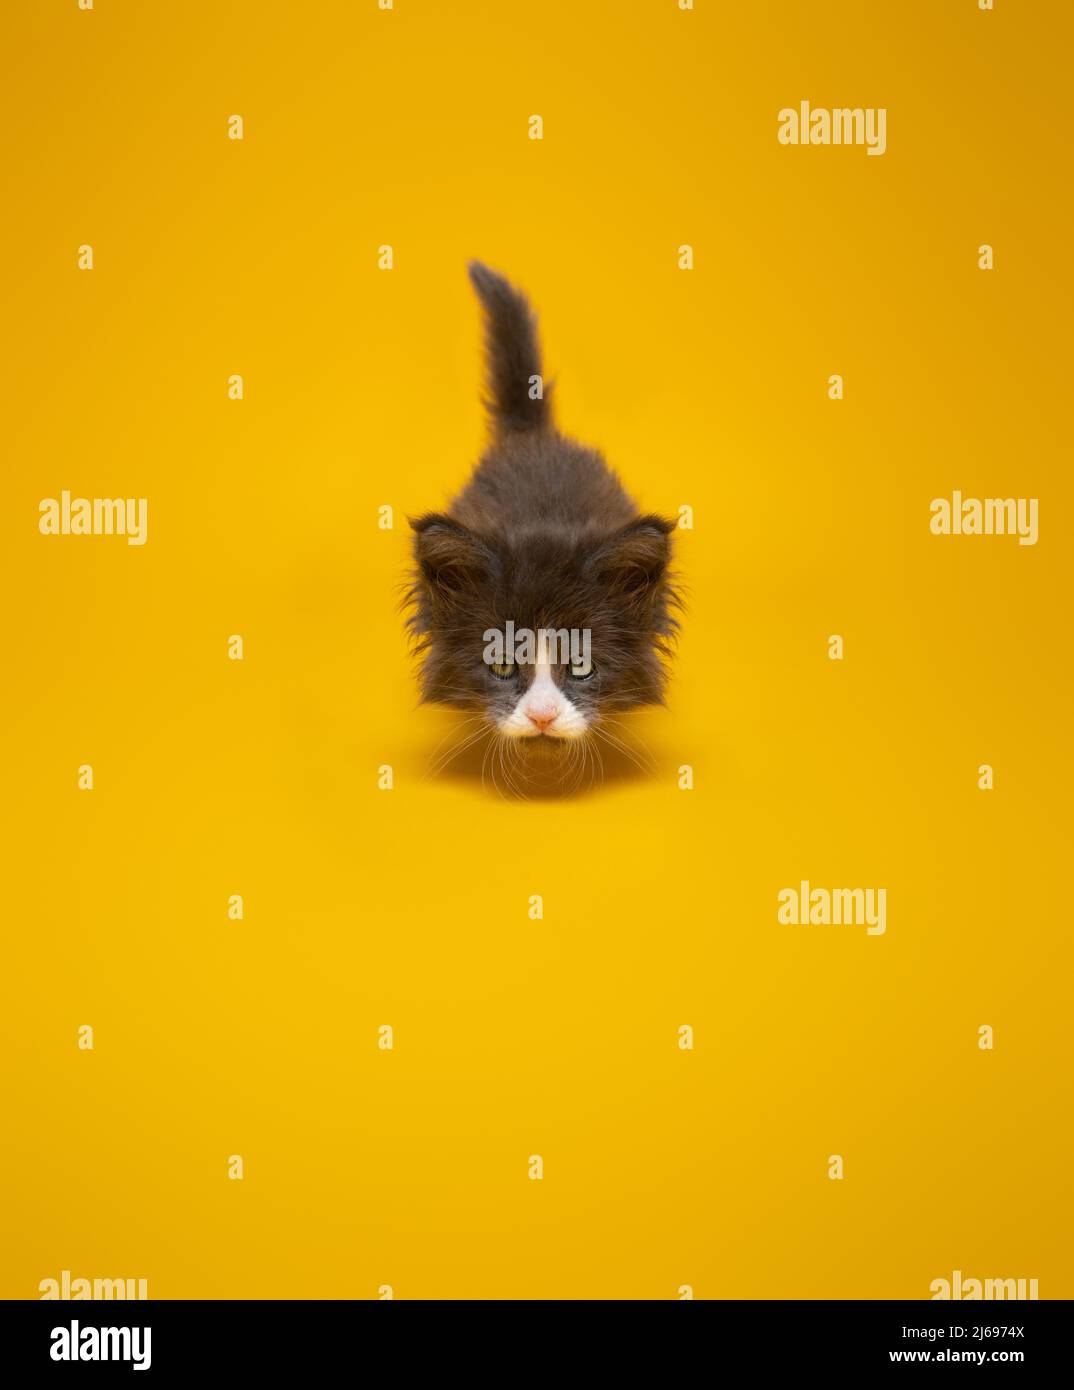 cute playful kitten hunting sneaking up on camera on yellow background with copy space Stock Photo